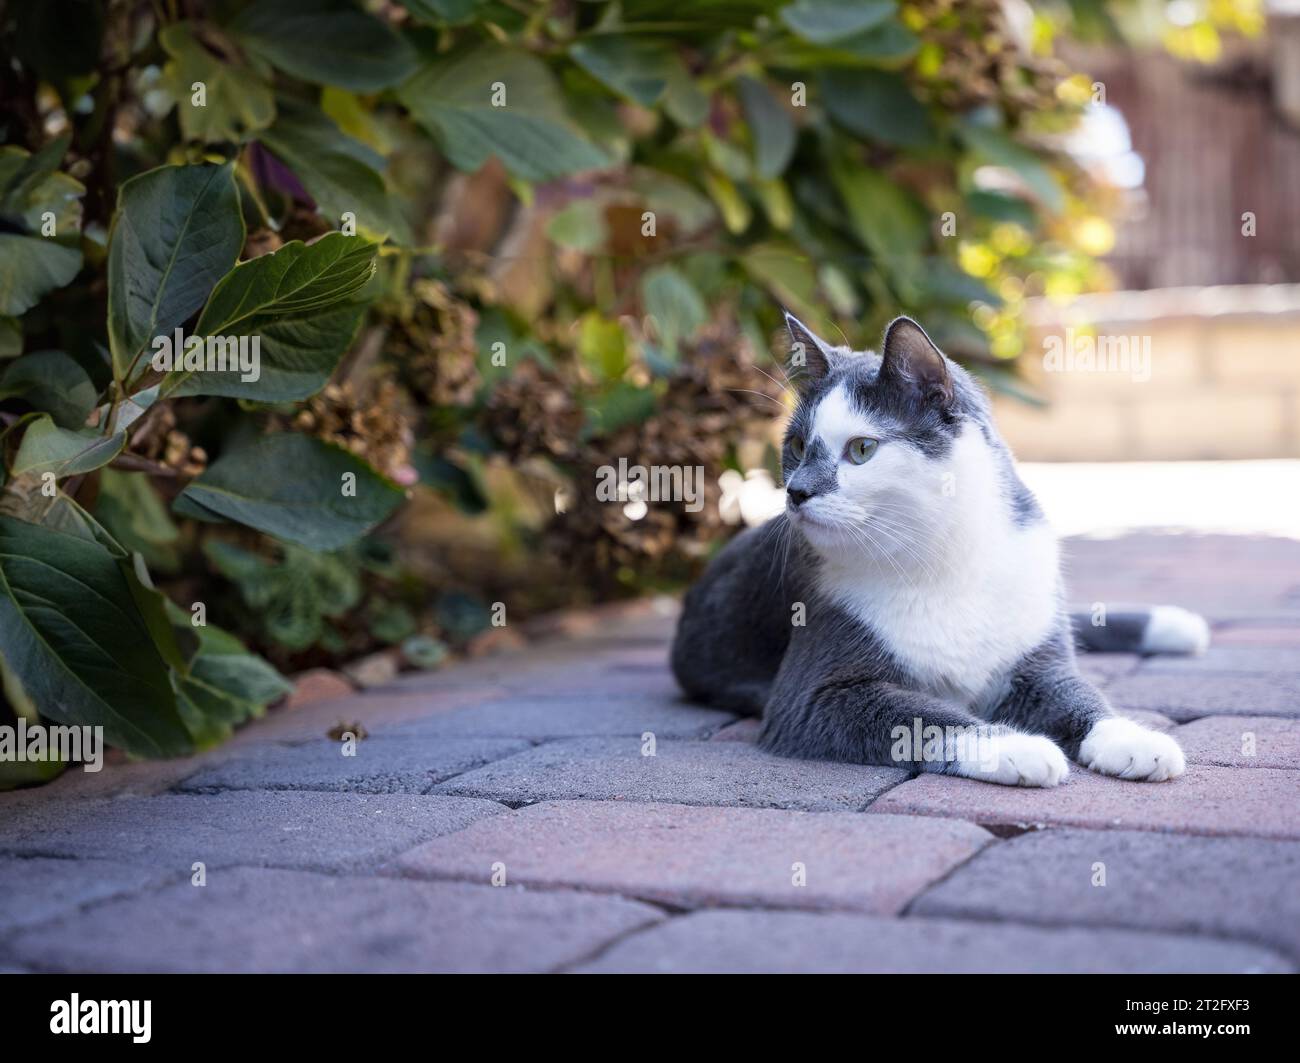 gray and white cat laying on the ground in the backyard garden Stock Photo